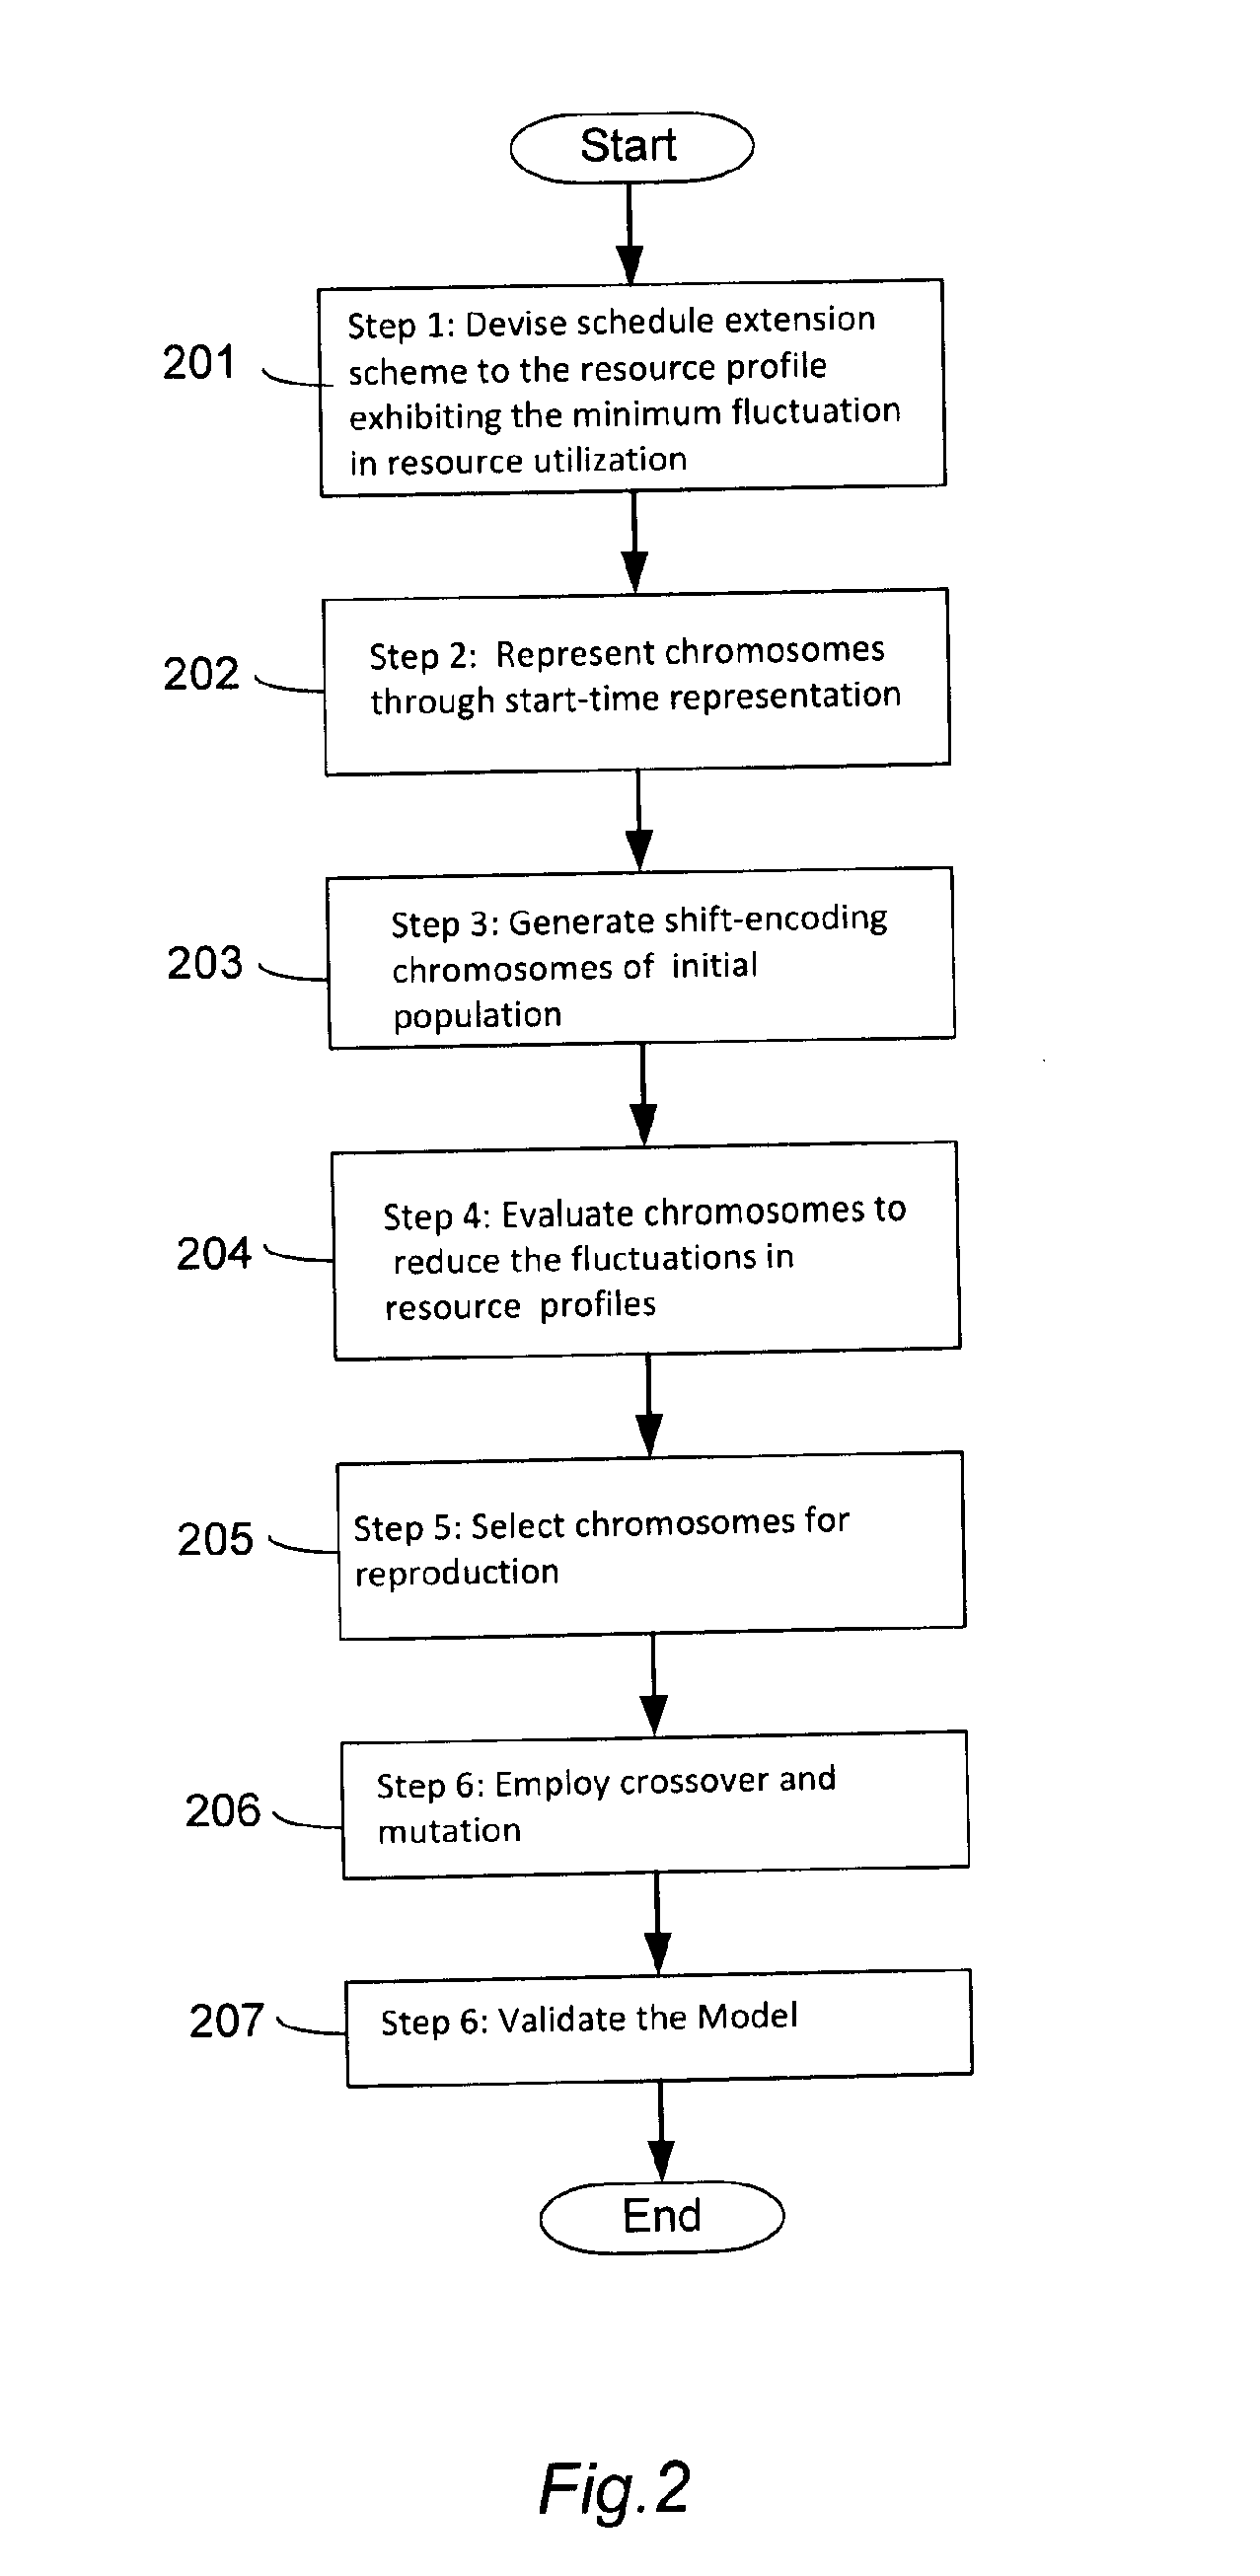 Method of reducing resource fluctuations in resource leveling